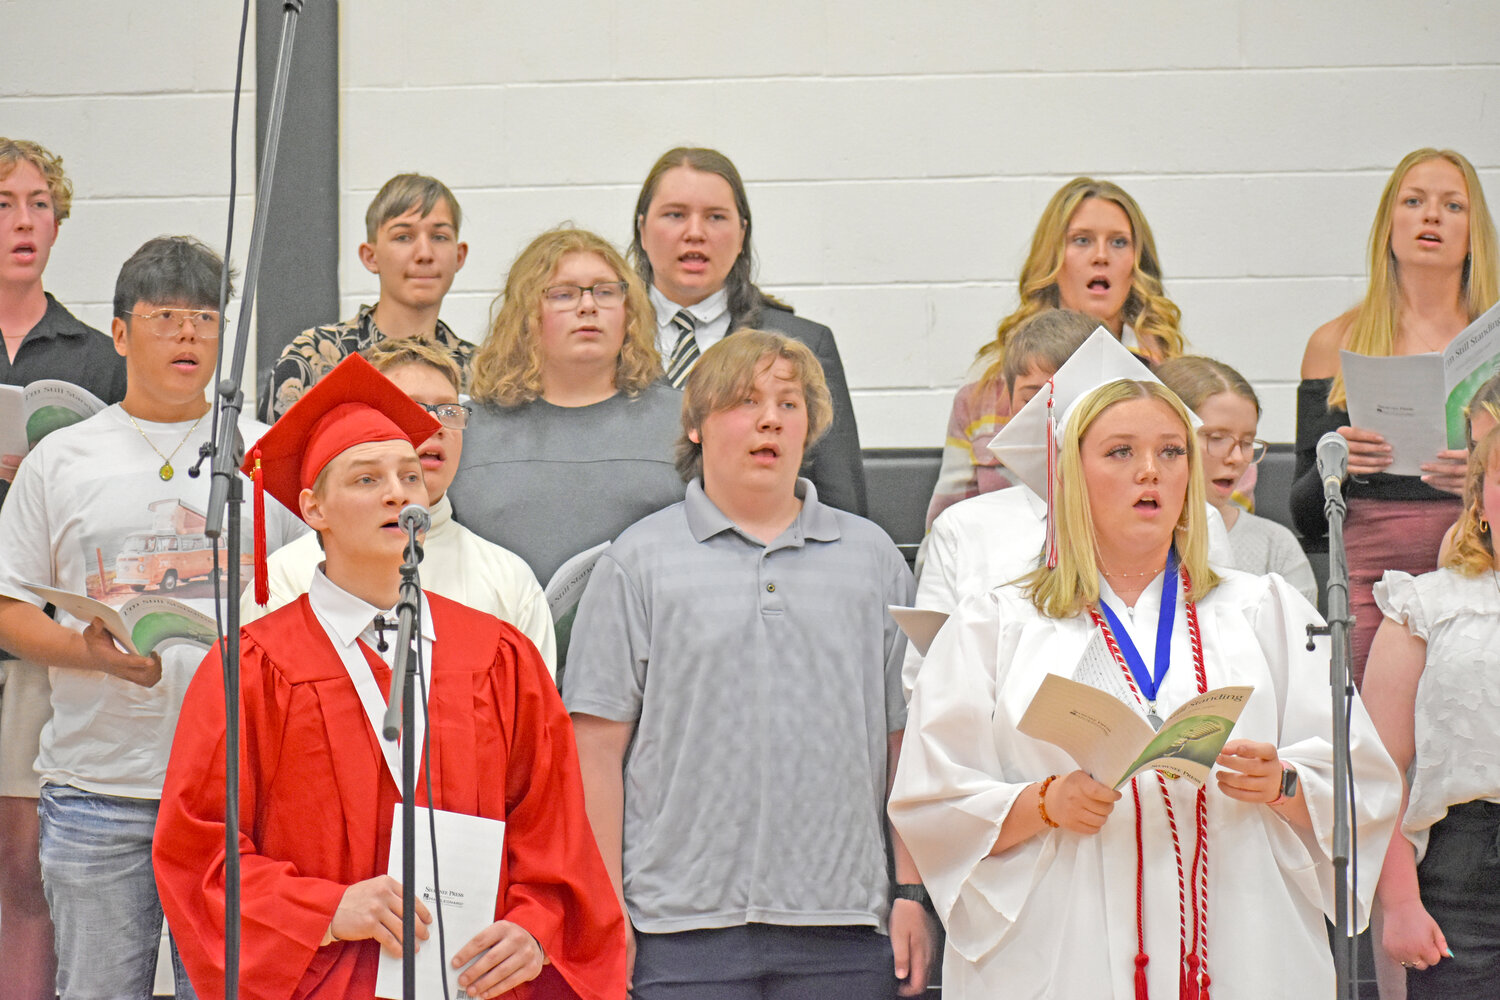 Seniors Ethan Krotz and Anna Herrig sing solos in “I’m Still Standing,” backed up by the high school choir.